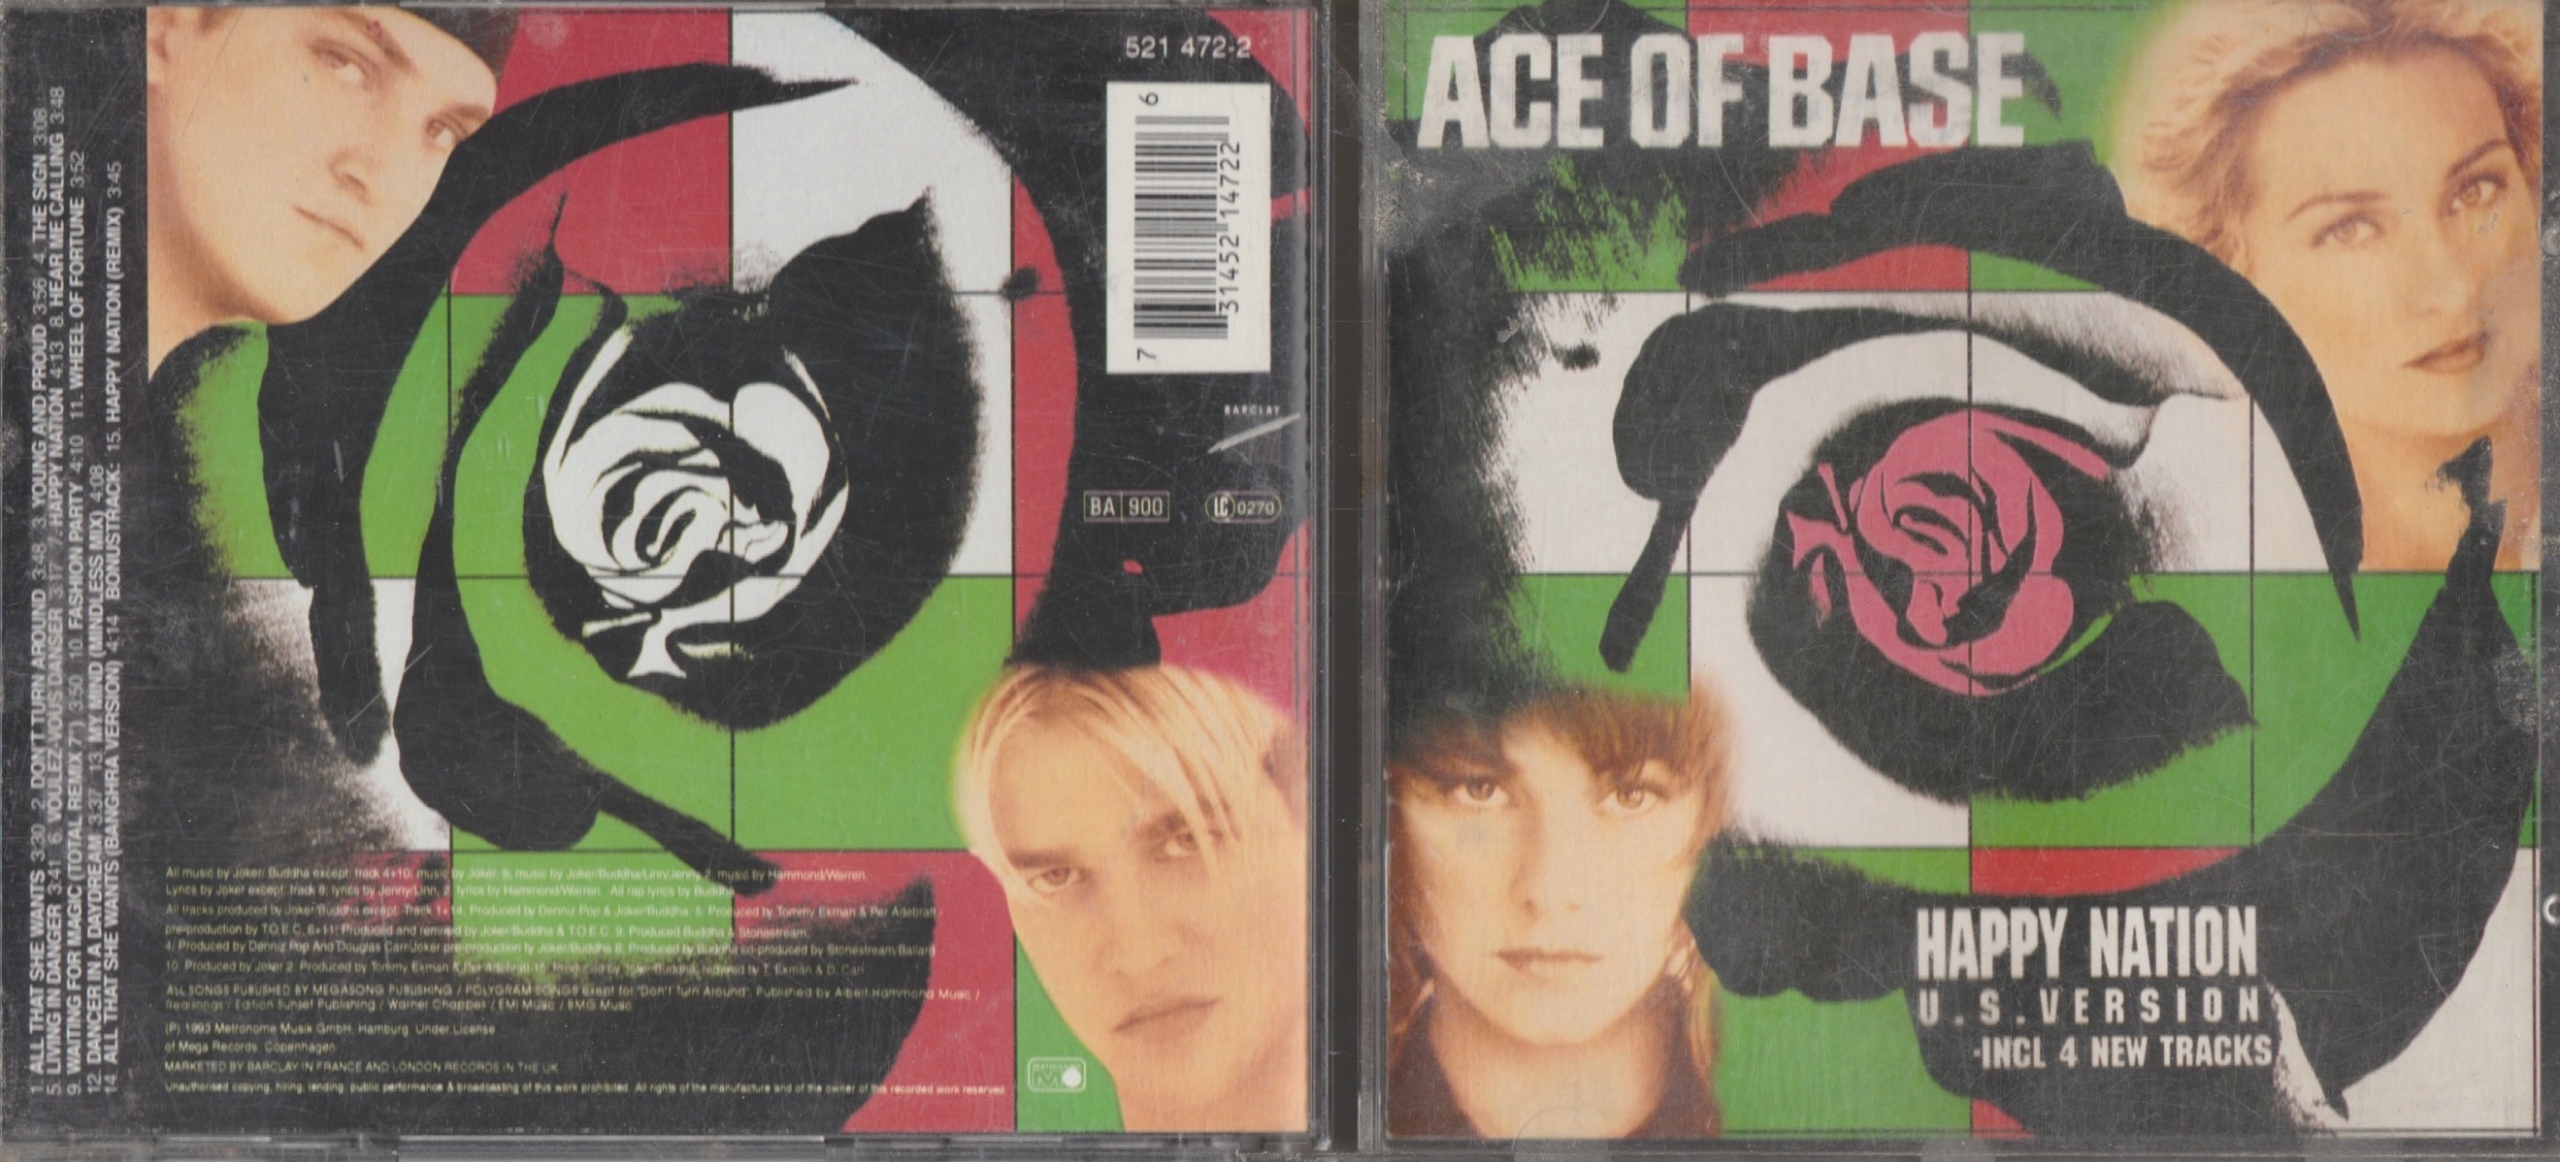 Happy nation смысл. Ace of Base the sign 1993. Ace of Base CD. Ace of Base Happy Nation обложка. Ace of Base Happy Nation u.s. Version.